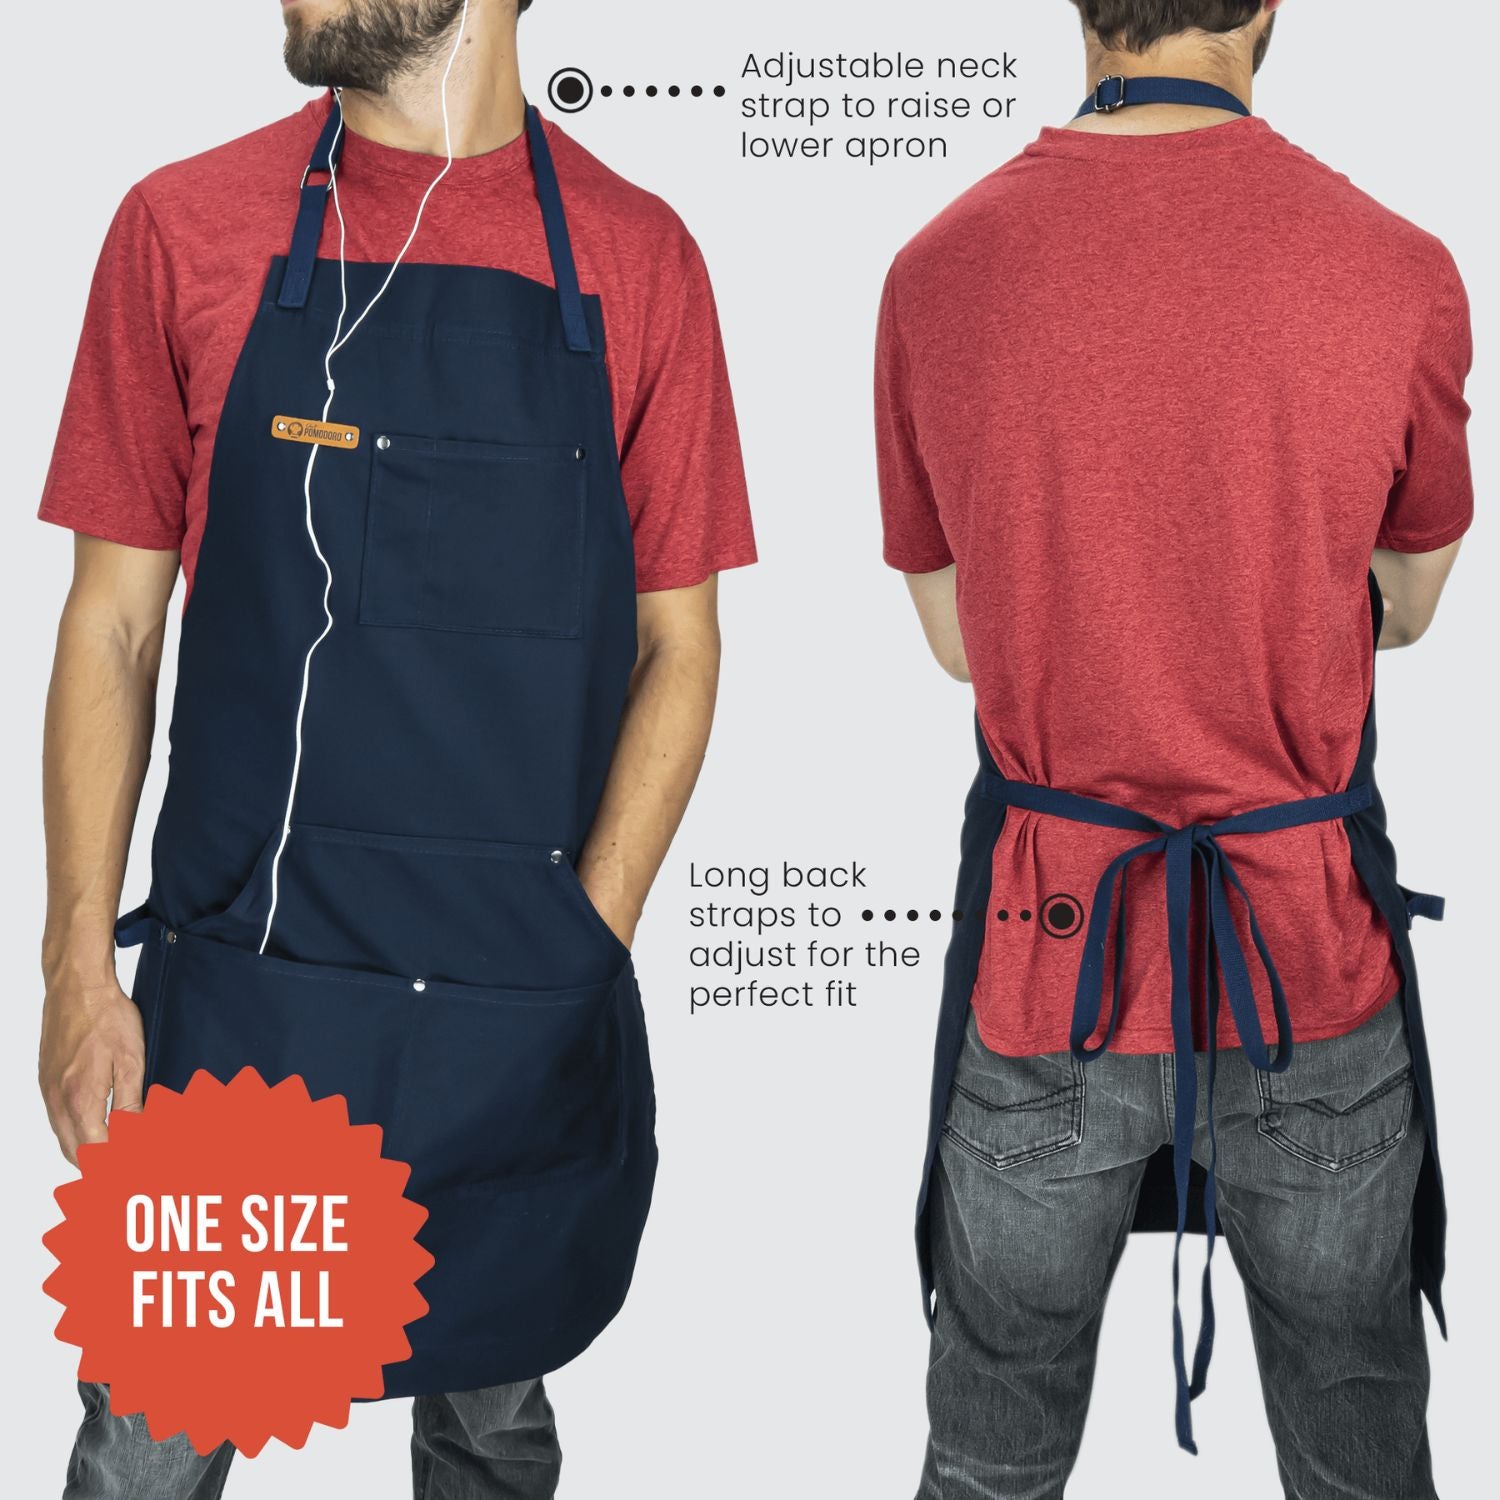 Kitchen apron with pockets and adjustable neck straps